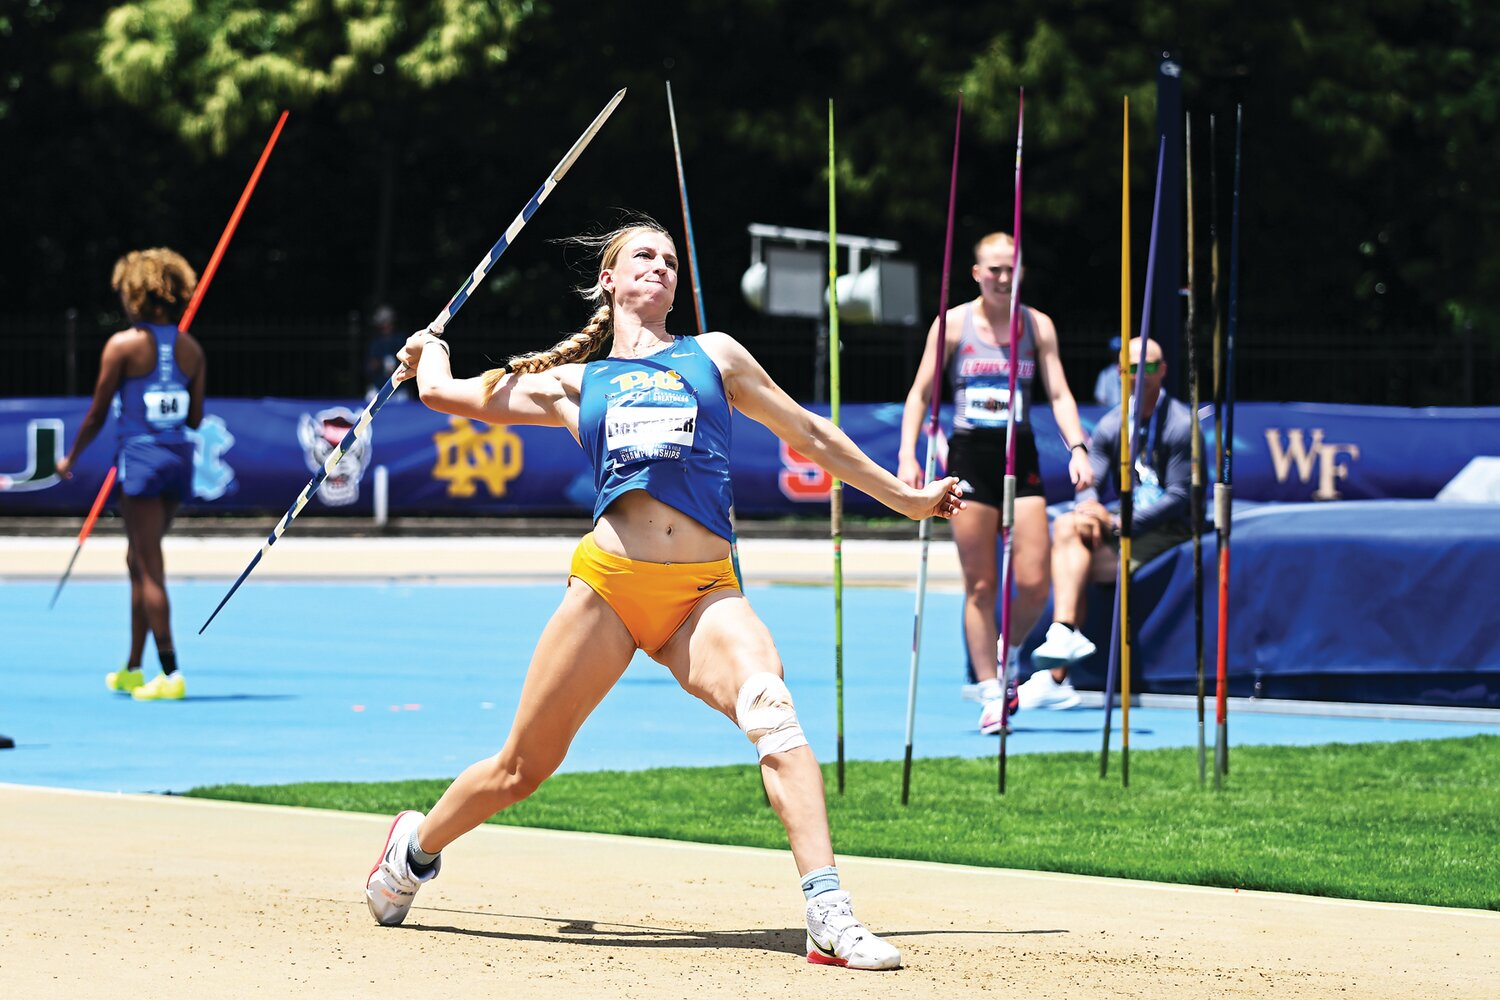 University of Pittsburgh’s Lydia Bottelier, a graduate of Palisades, won bronze in the heptathlon at the ACC Outdoor Track and Field Championships in May. The Heptathlon involves the 200 meter, 800 meter, the 100-meter hurdles, the high jump, long jump, shot put and javelin throw.